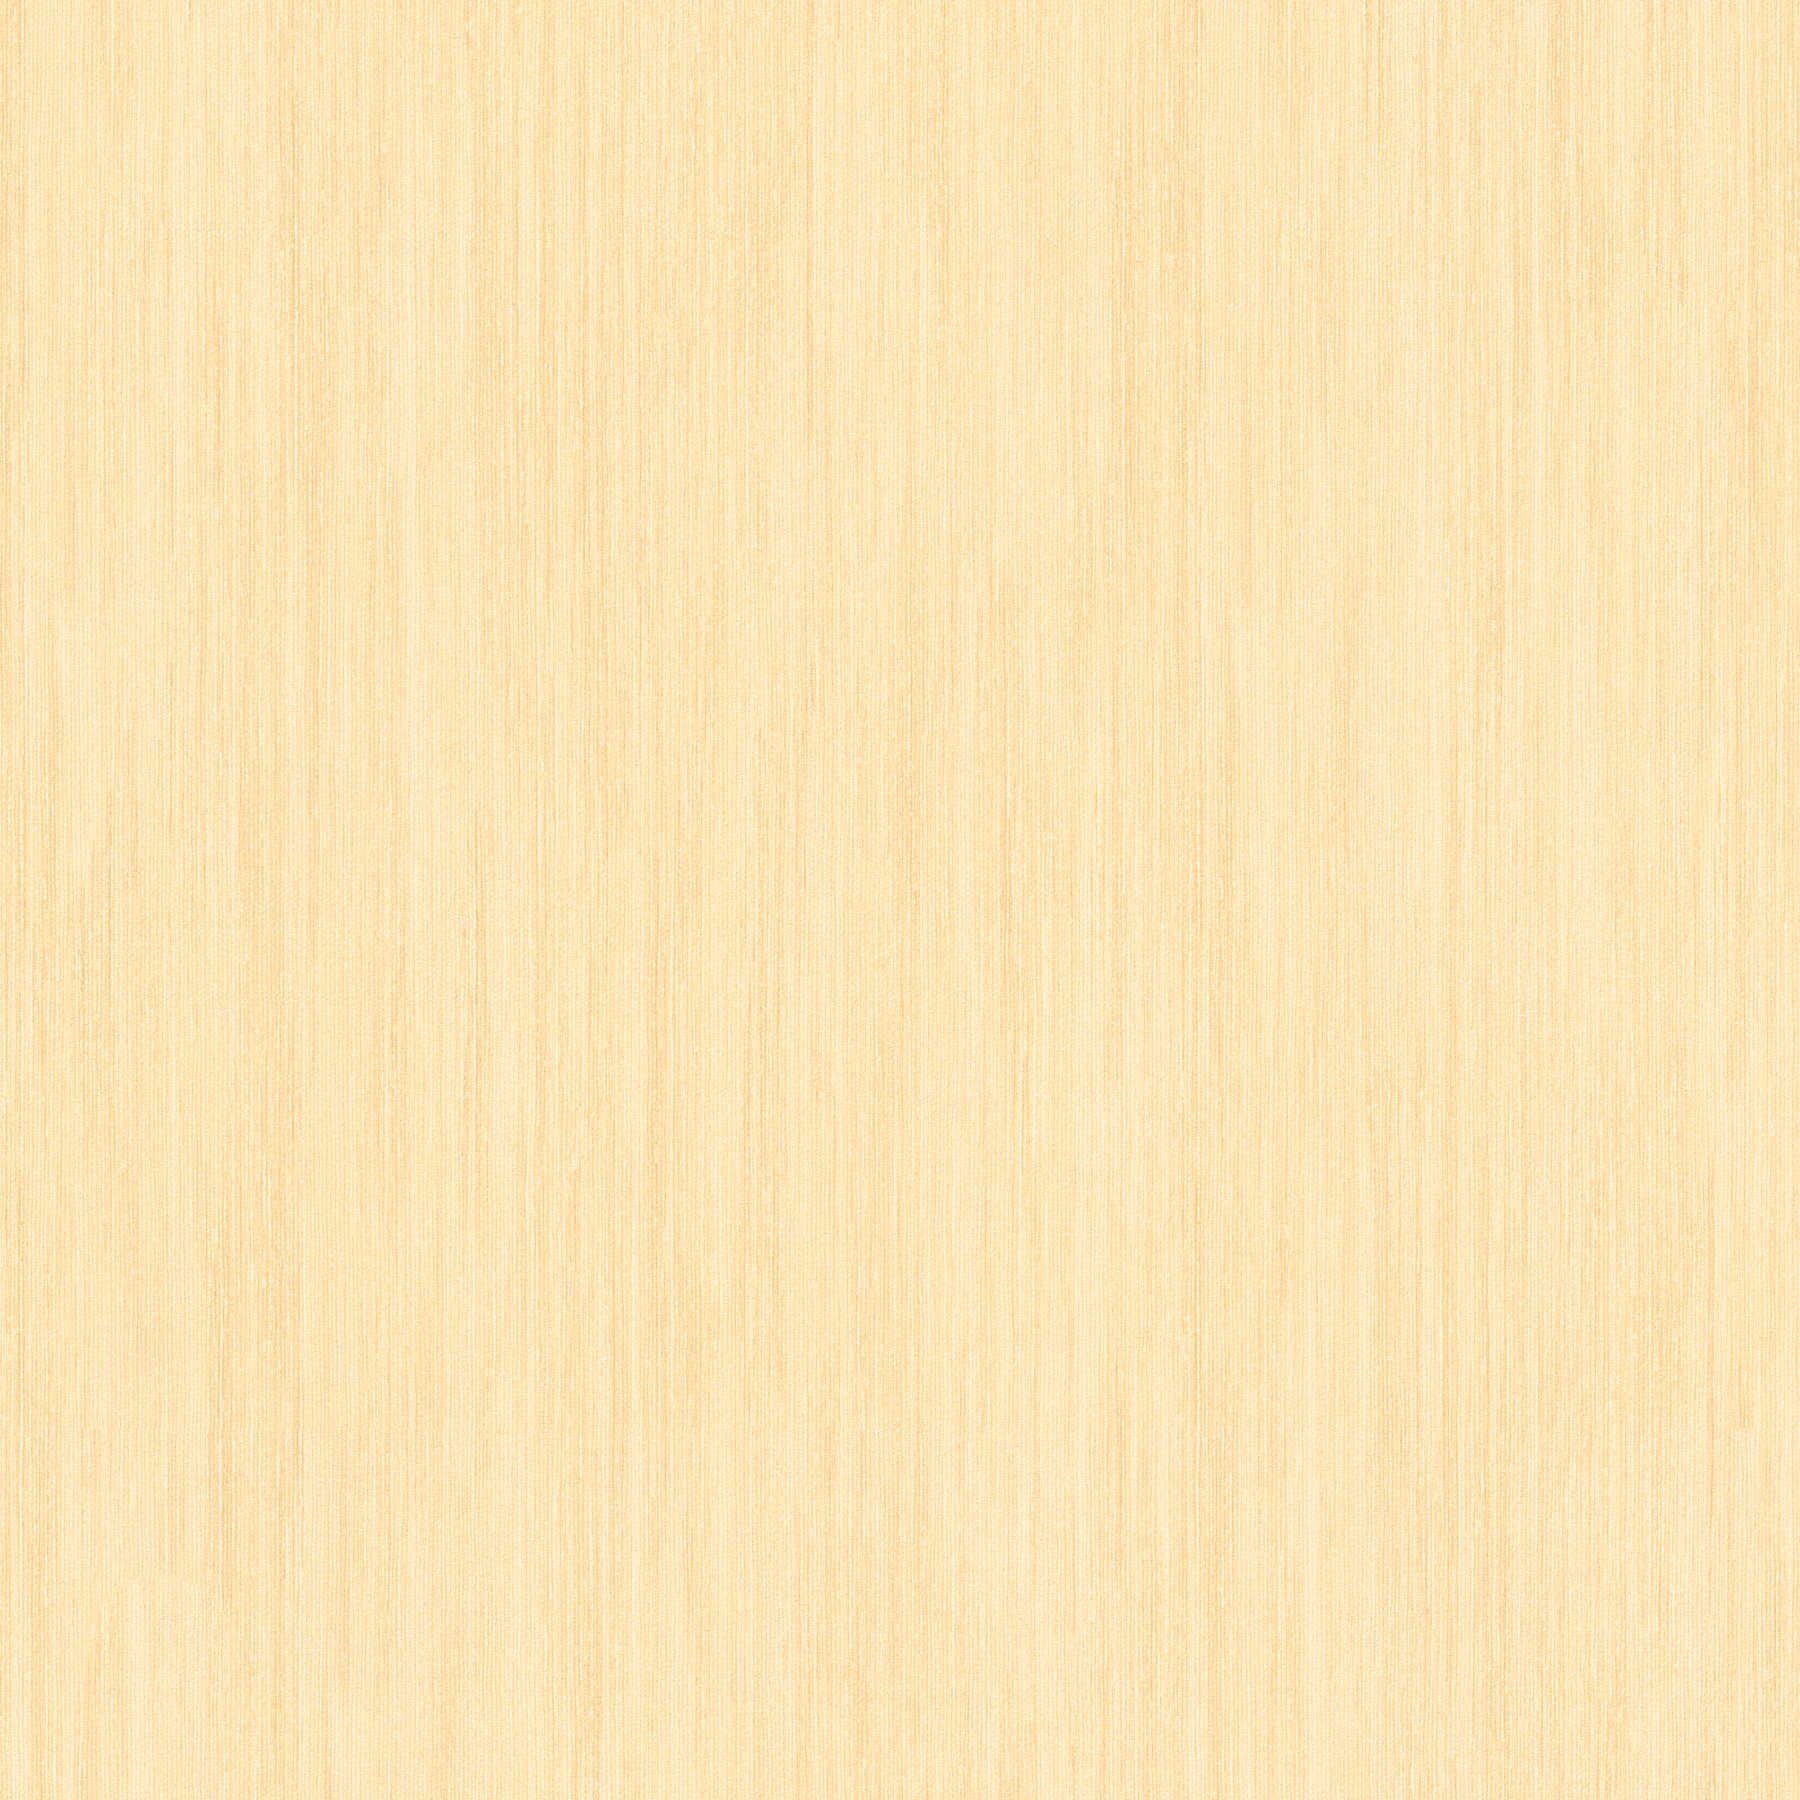 Sand yellow wallpaper plain yellow with structure embossing
